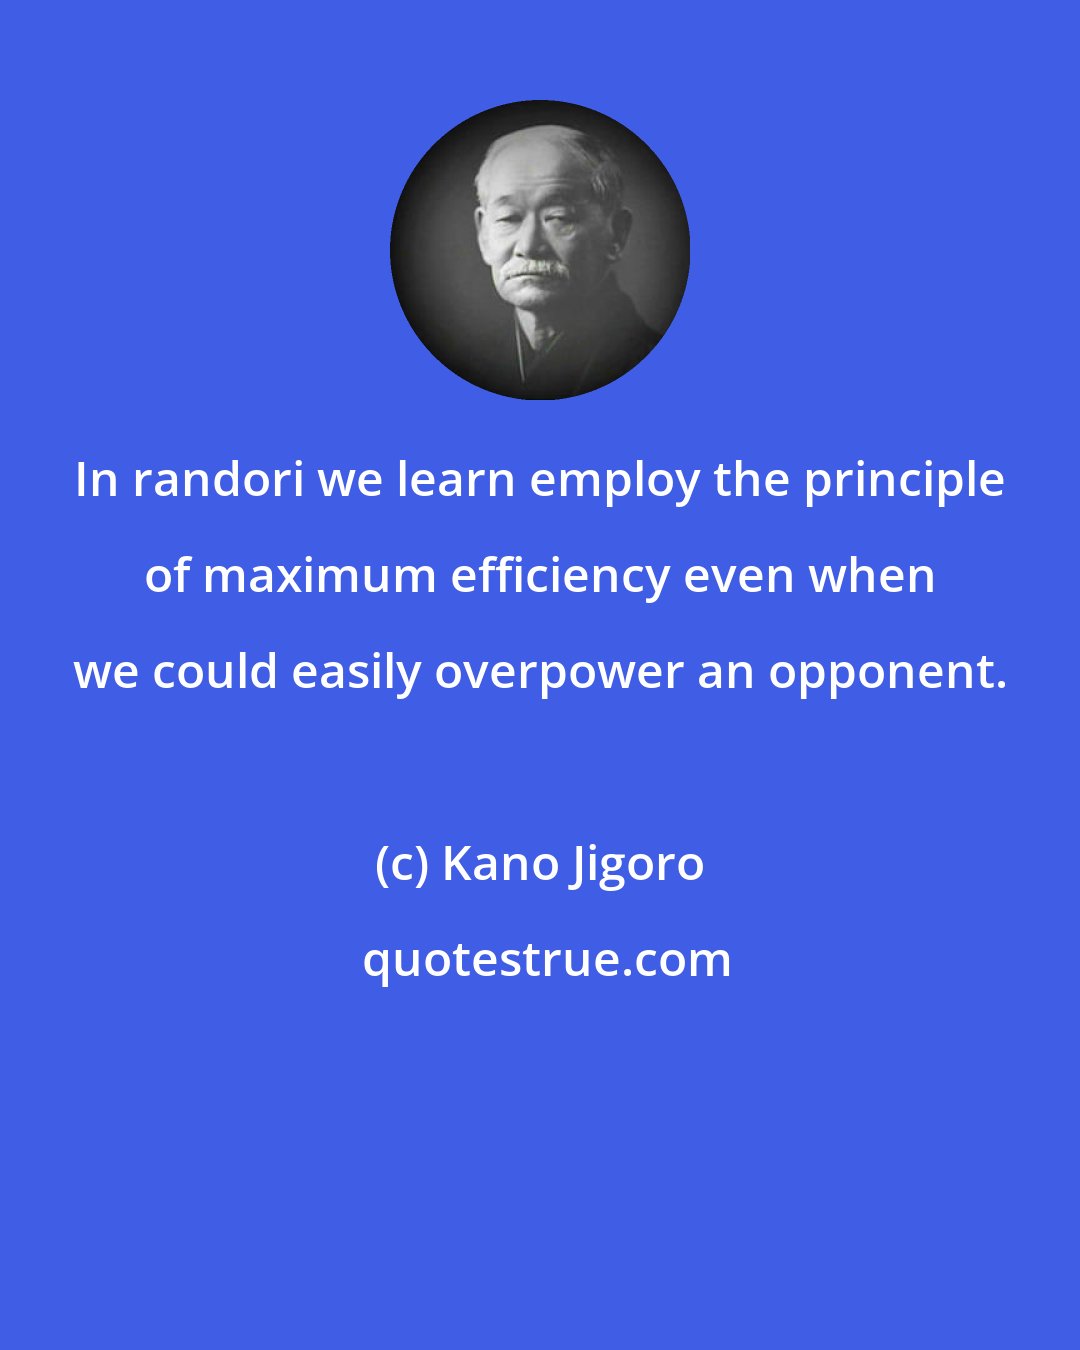 Kano Jigoro: In randori we learn employ the principle of maximum efficiency even when we could easily overpower an opponent.